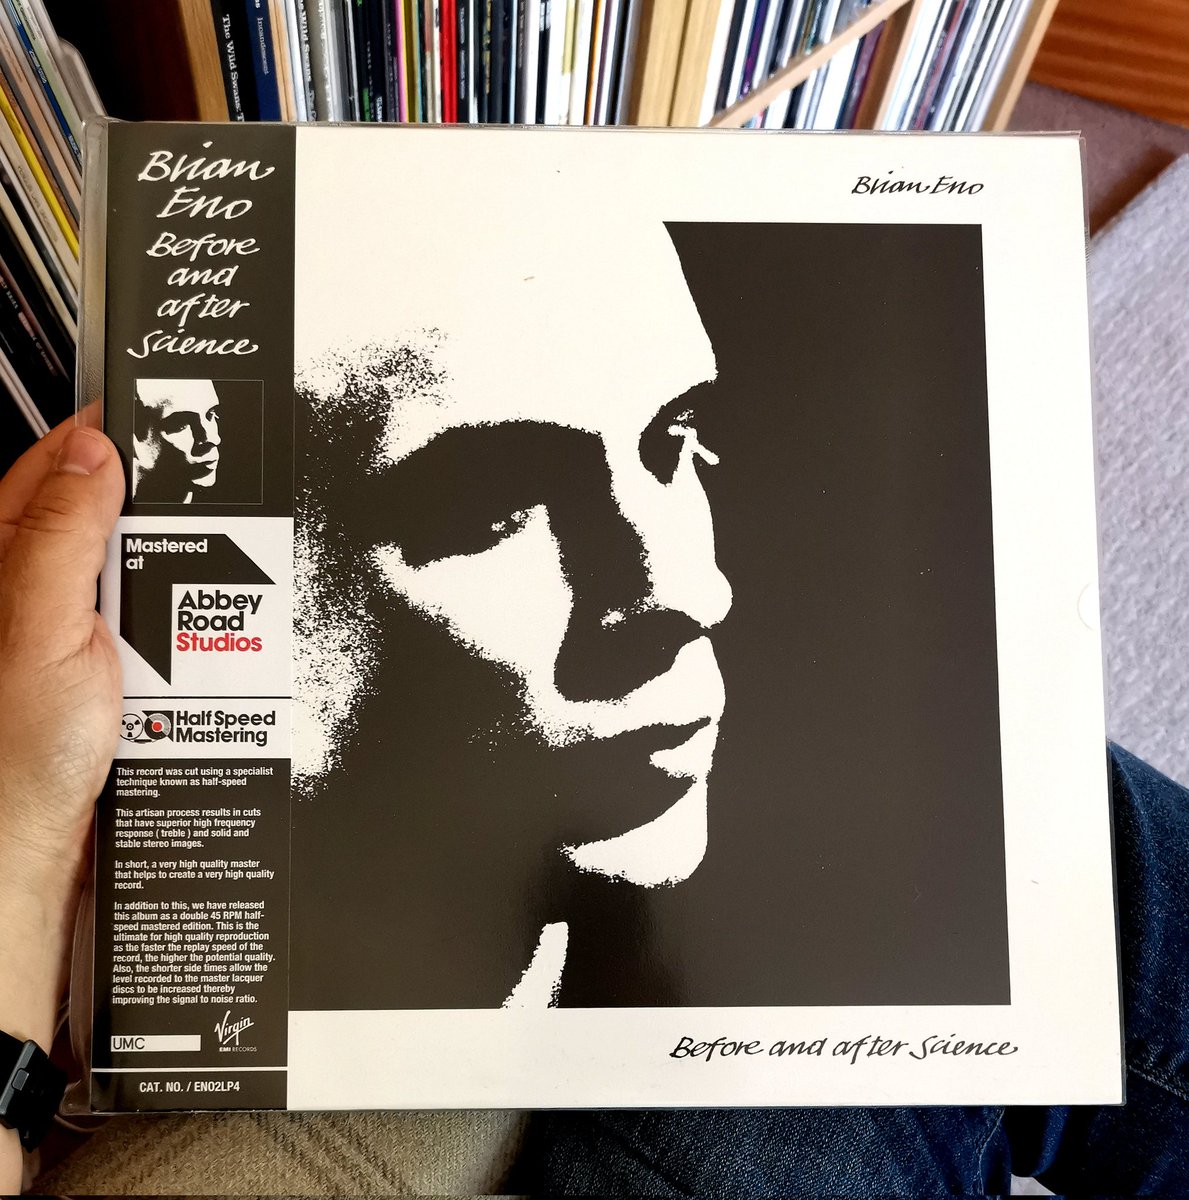 #NP Brian Eno - Before and After Science Born on this day in 1948